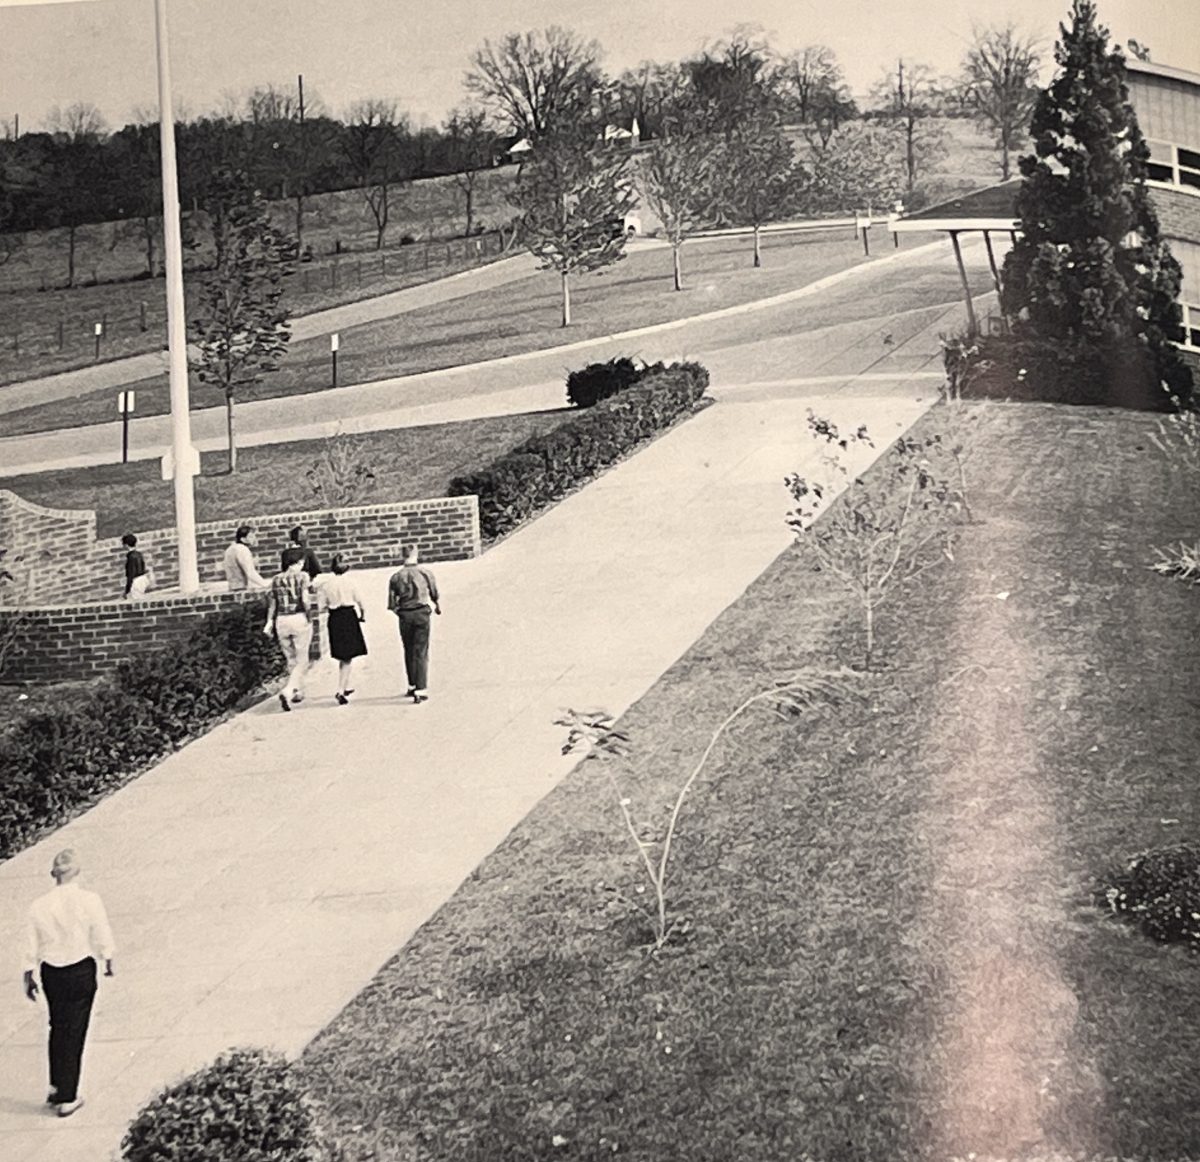 The school campus looked dramatically different from what is is today. Grassy fields and open spaces where students used to hang out have been turned into parking lots and athletic spaces.